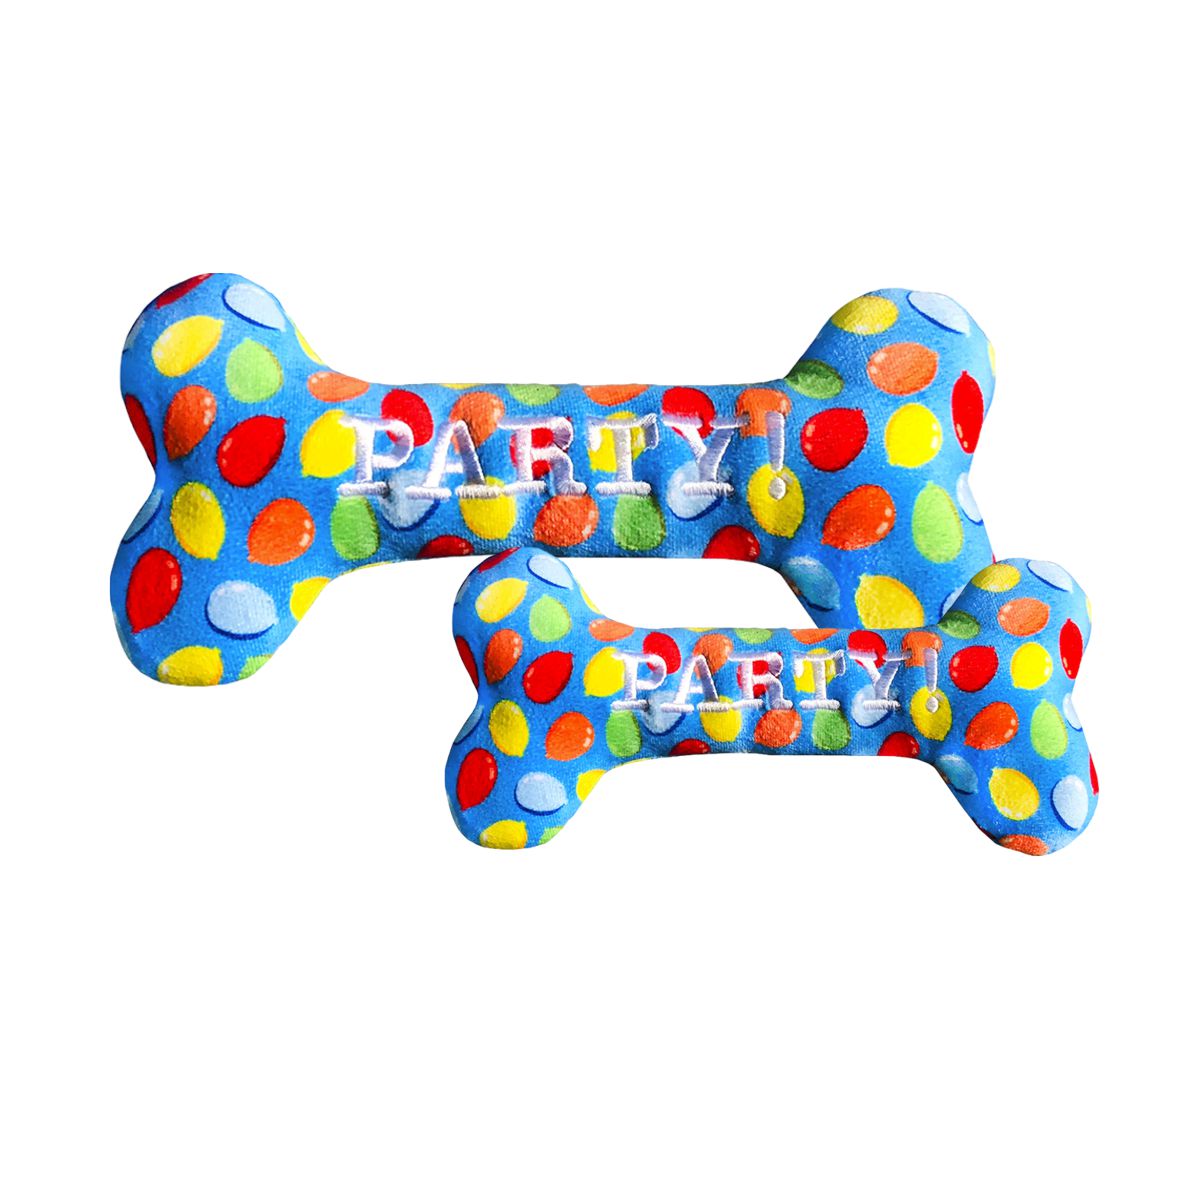 Lulubelles Party Time Bone in Blue | Pawlicious & Company